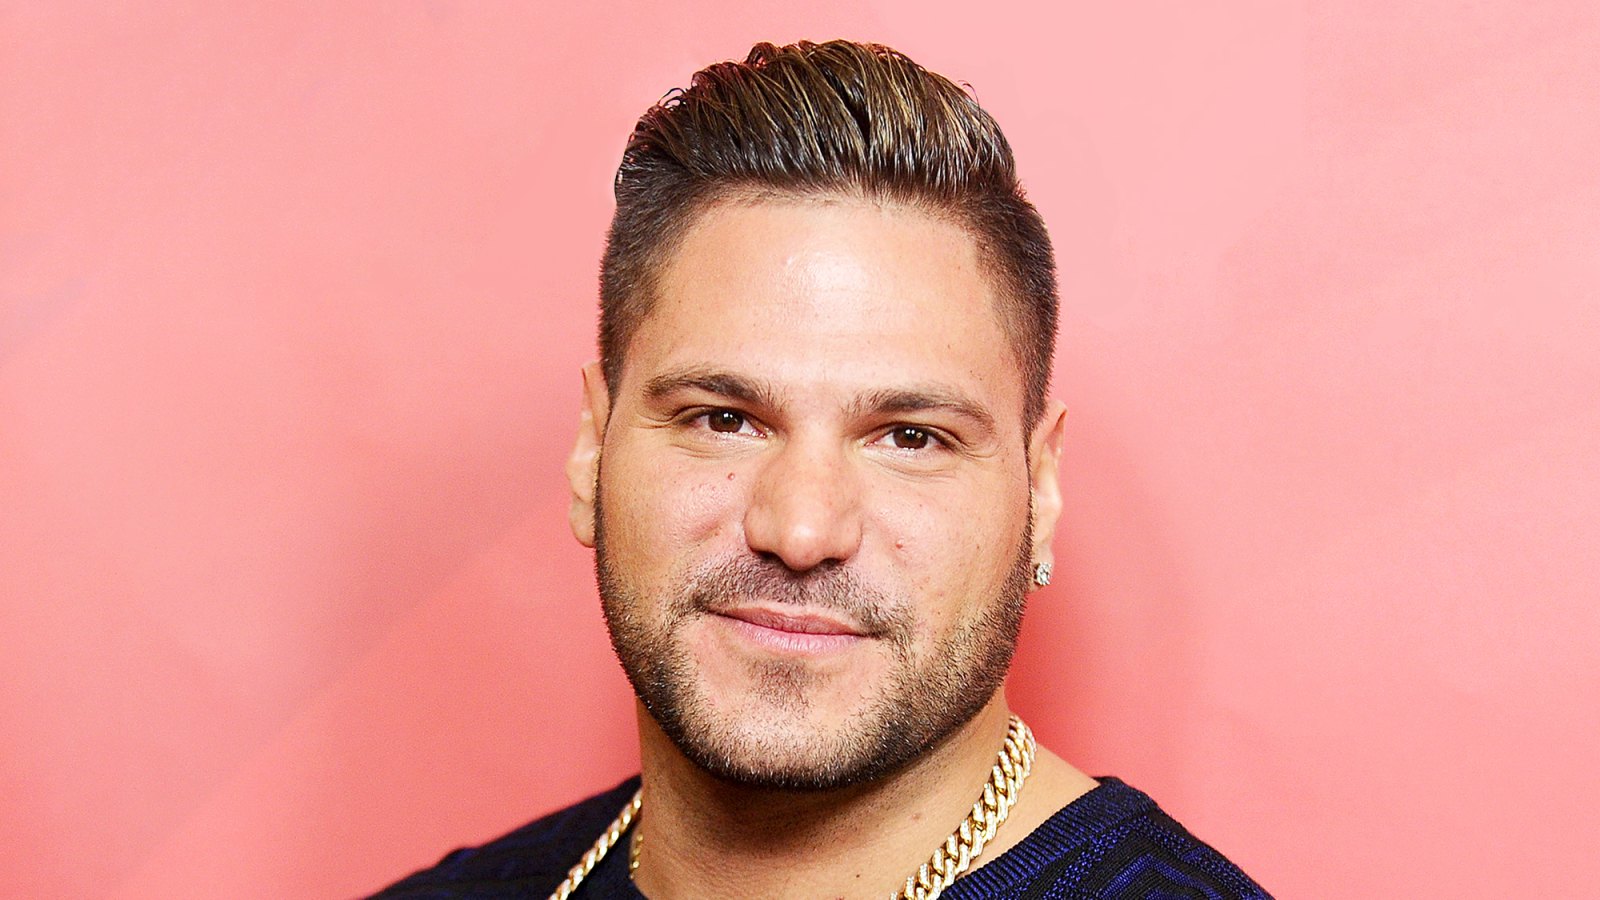 Ronnie Ortiz-Magro attends the 2017 NBCUniversal summer press day The Beverly Hilton Hotel in Beverly Hills, California.